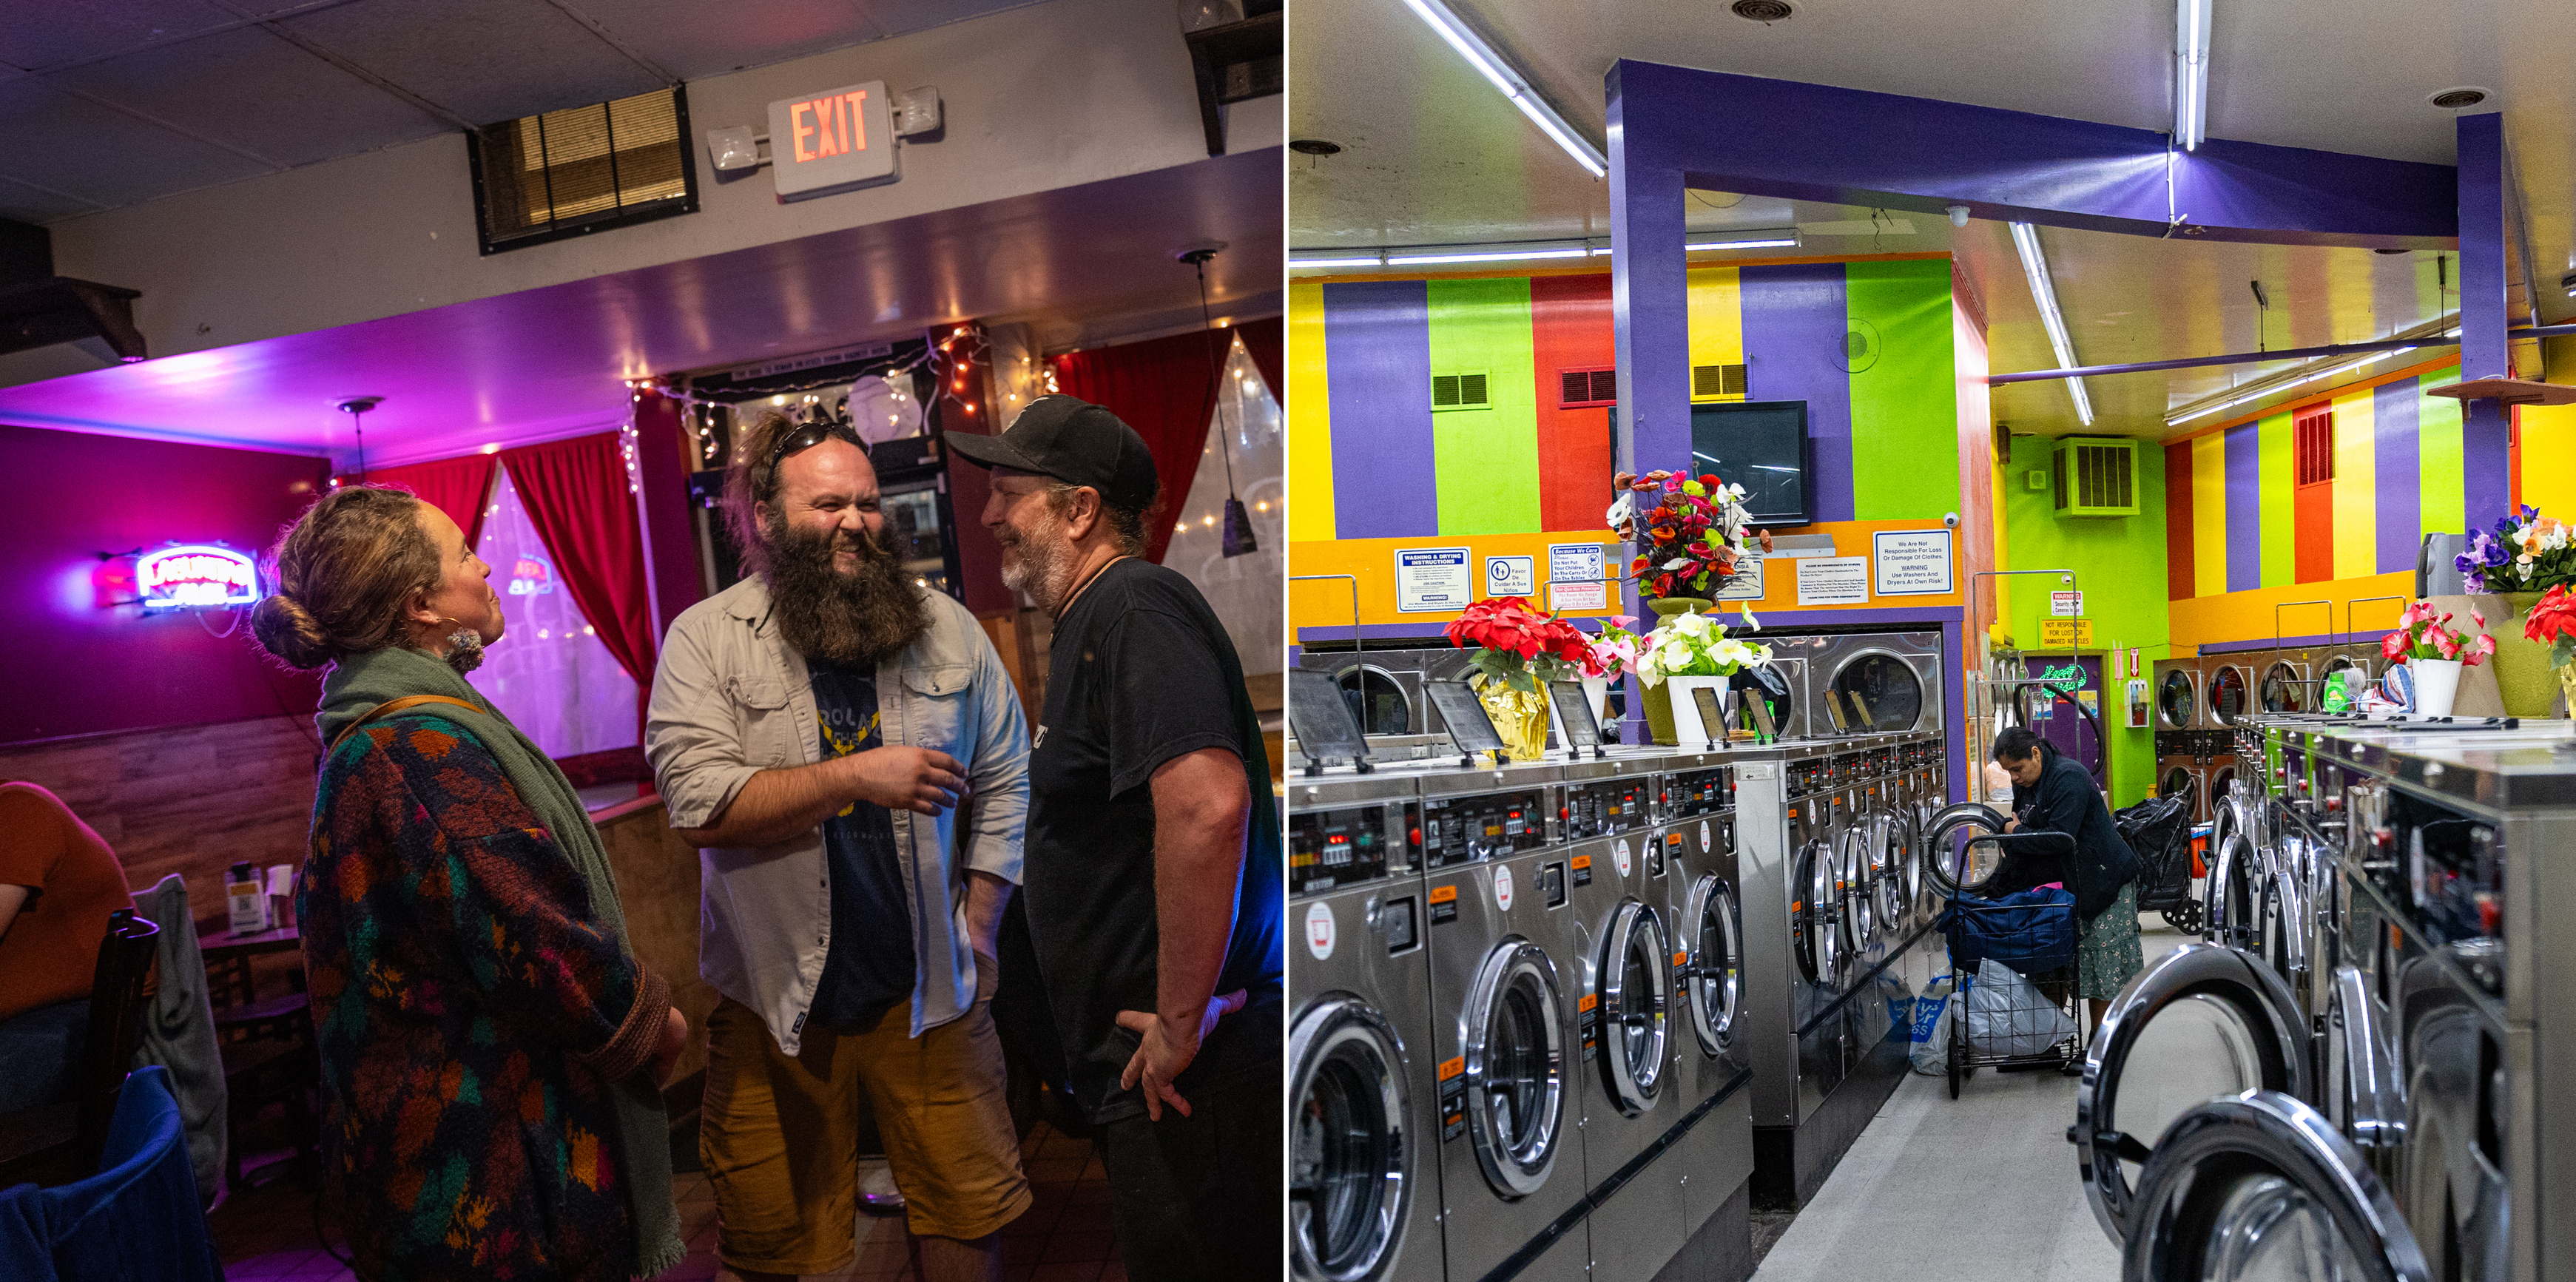 Two photos side by side - one of people talking in a bar setting and another of a group of people doing laundry in a laundromat setting.